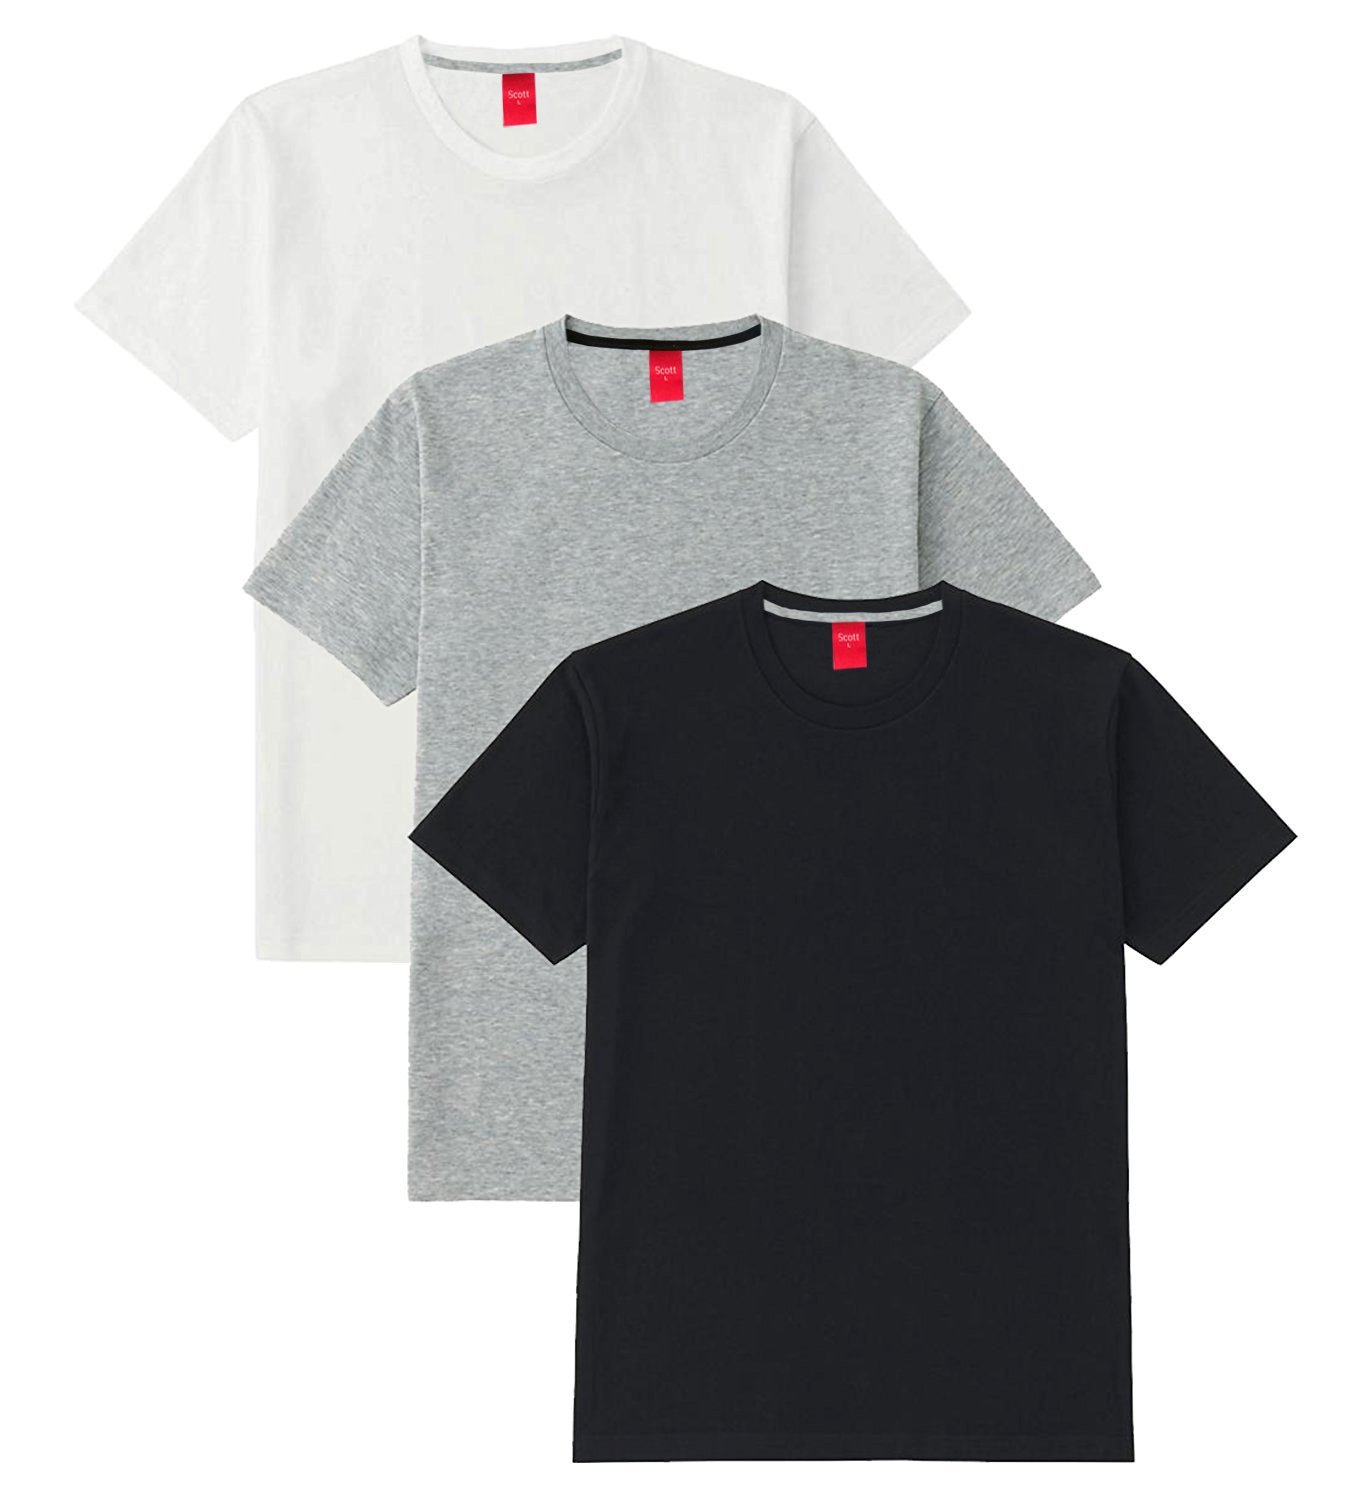 Amazon: Buy Scott Men’s Basic Cotton T-shirts – Pack of 3 at Rs 399 only